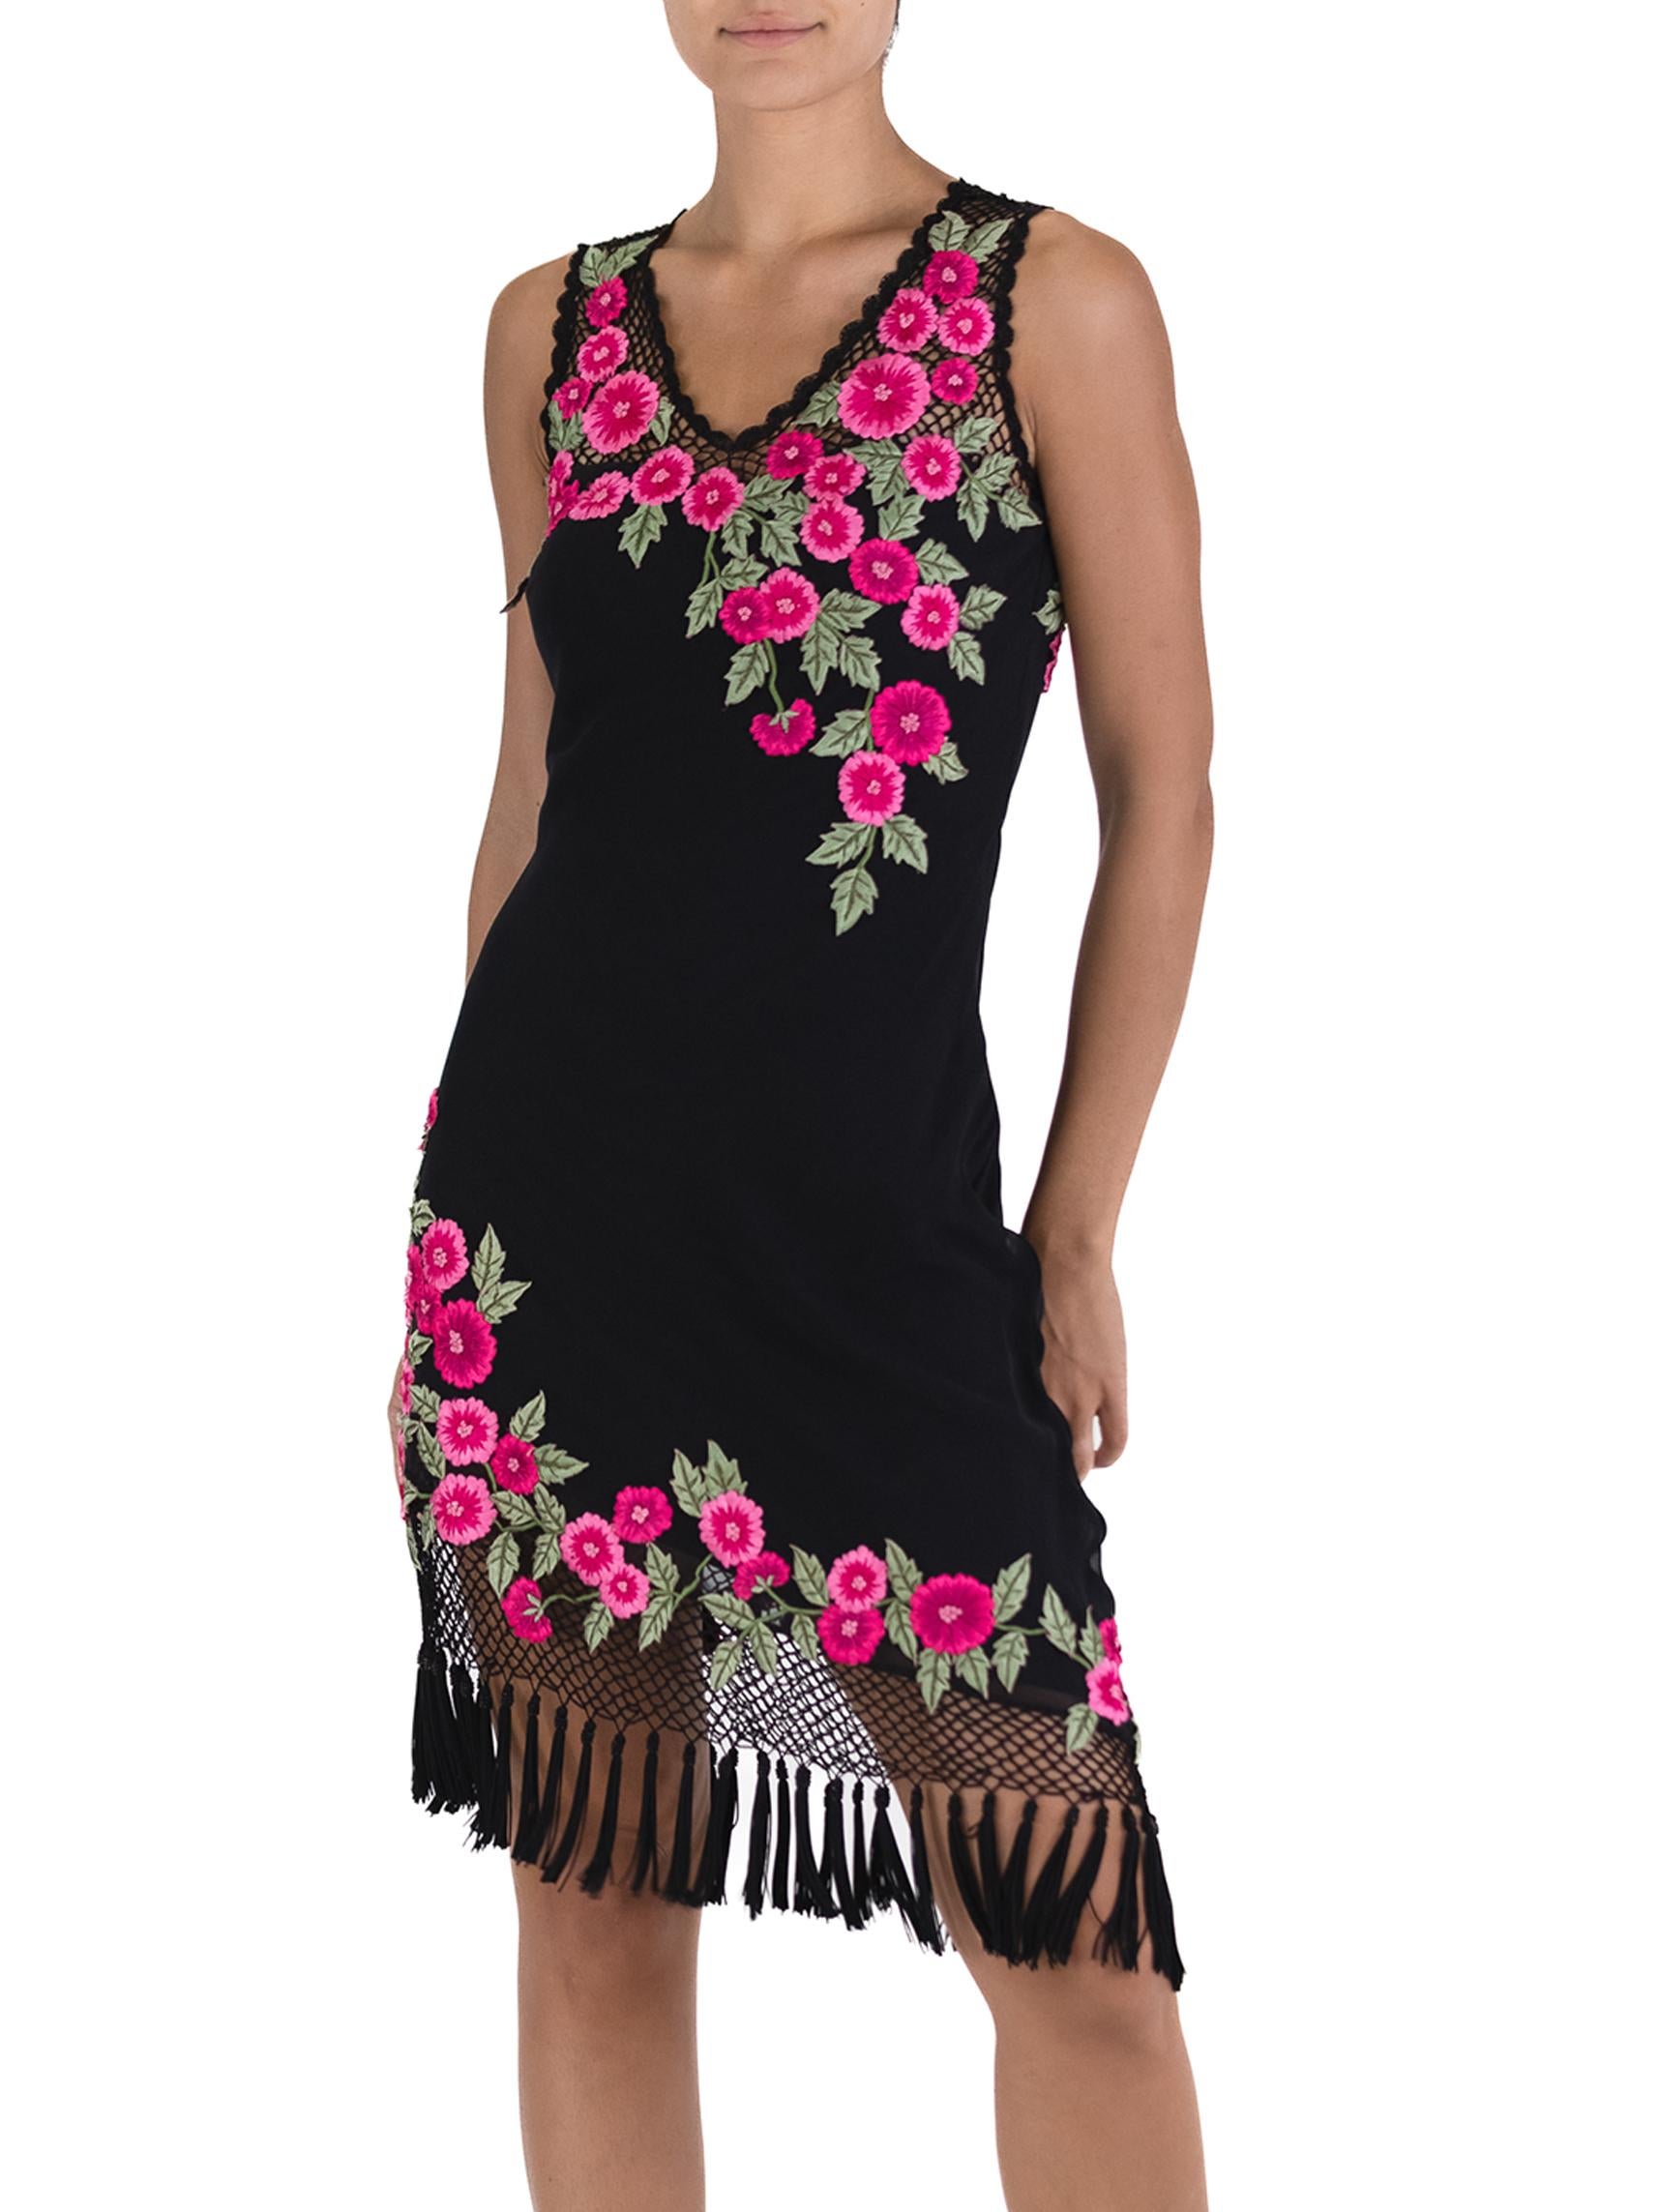 Women's 1990S Black Dress With Pink Embroidered Flower Detail For Sale